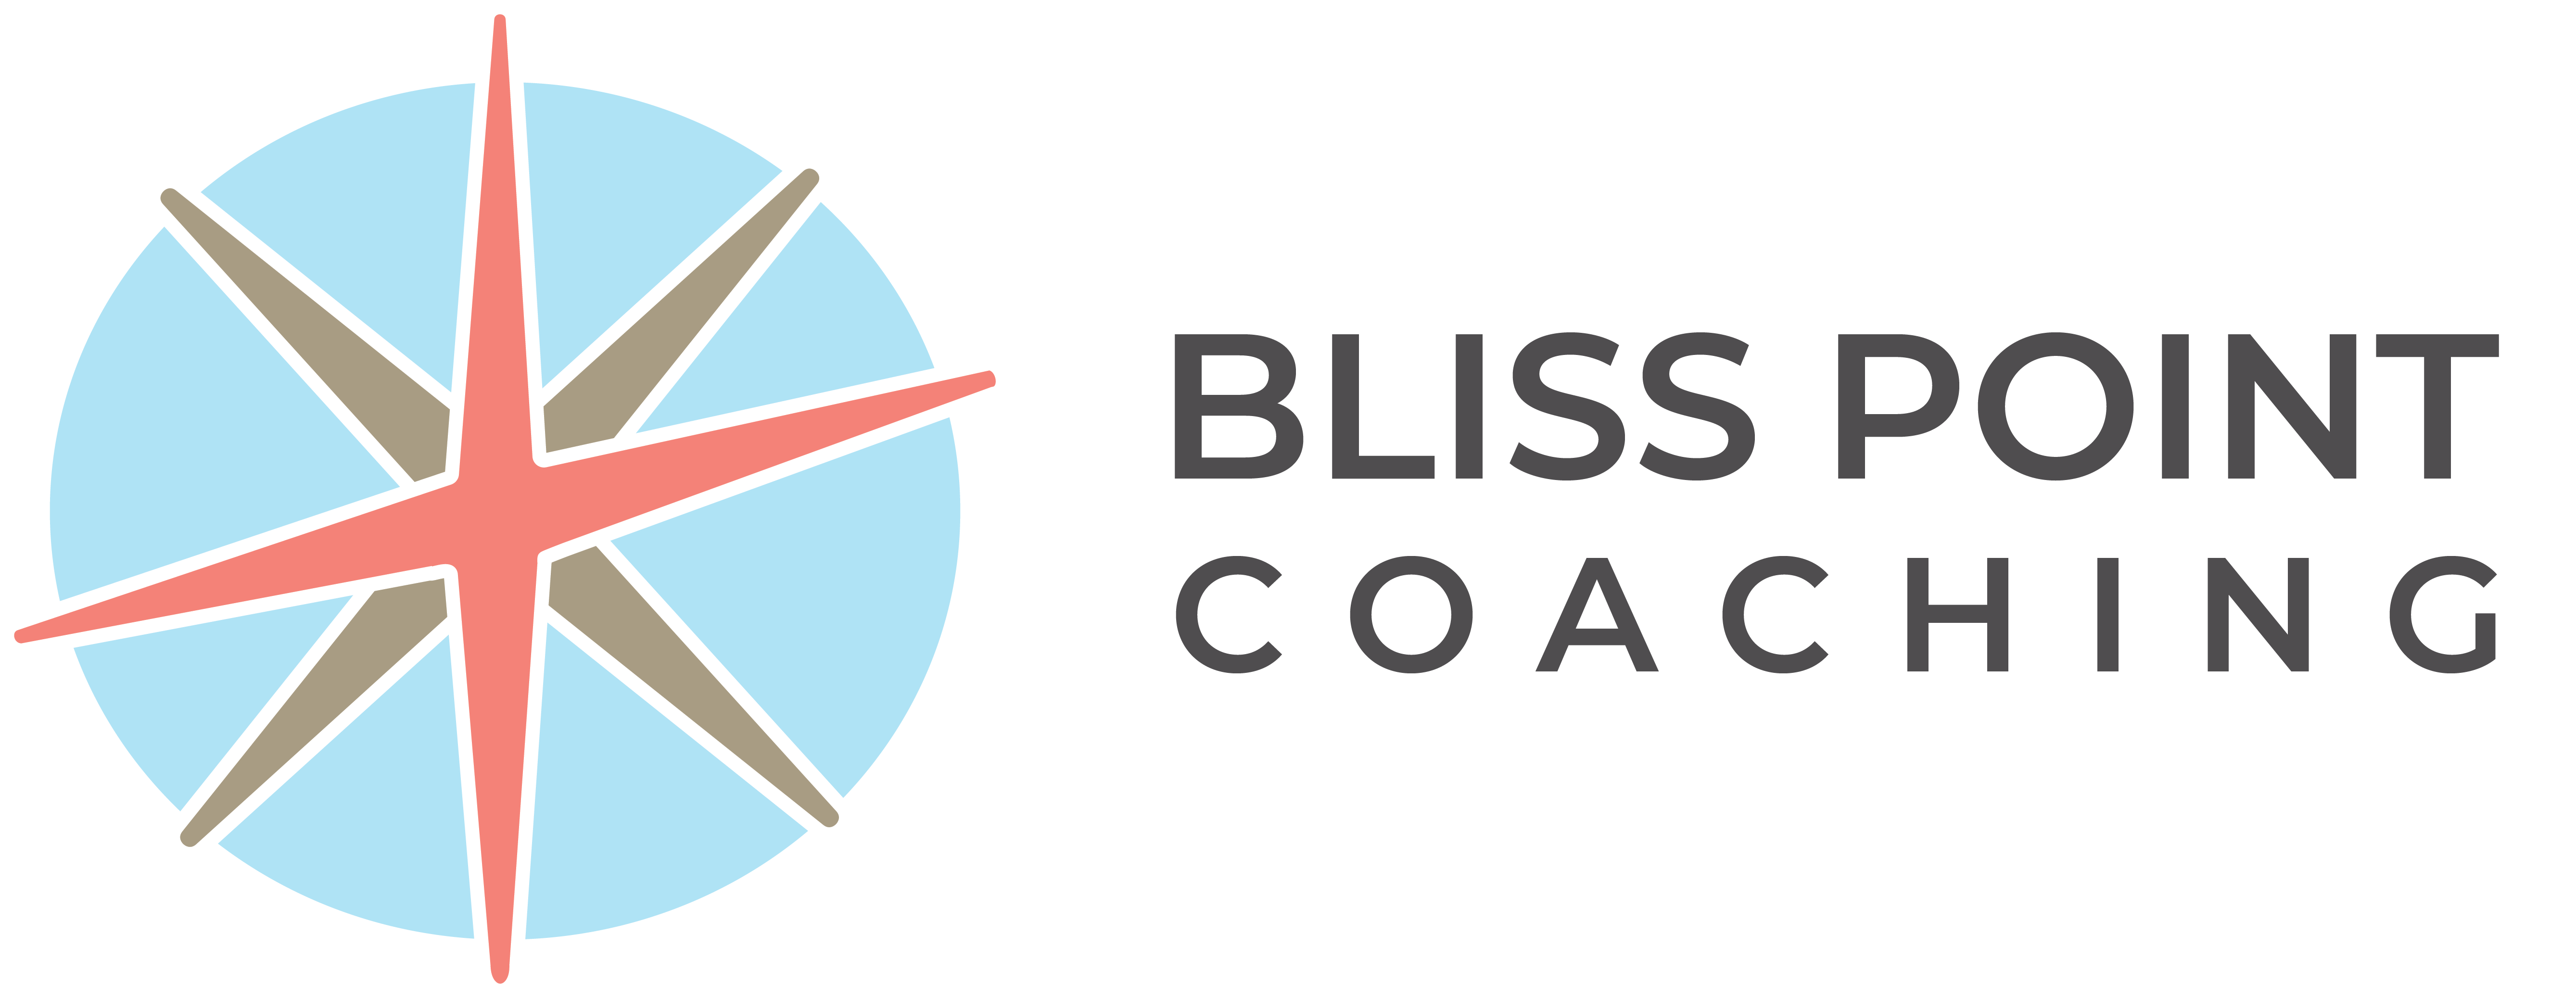 Bliss Point Coaching